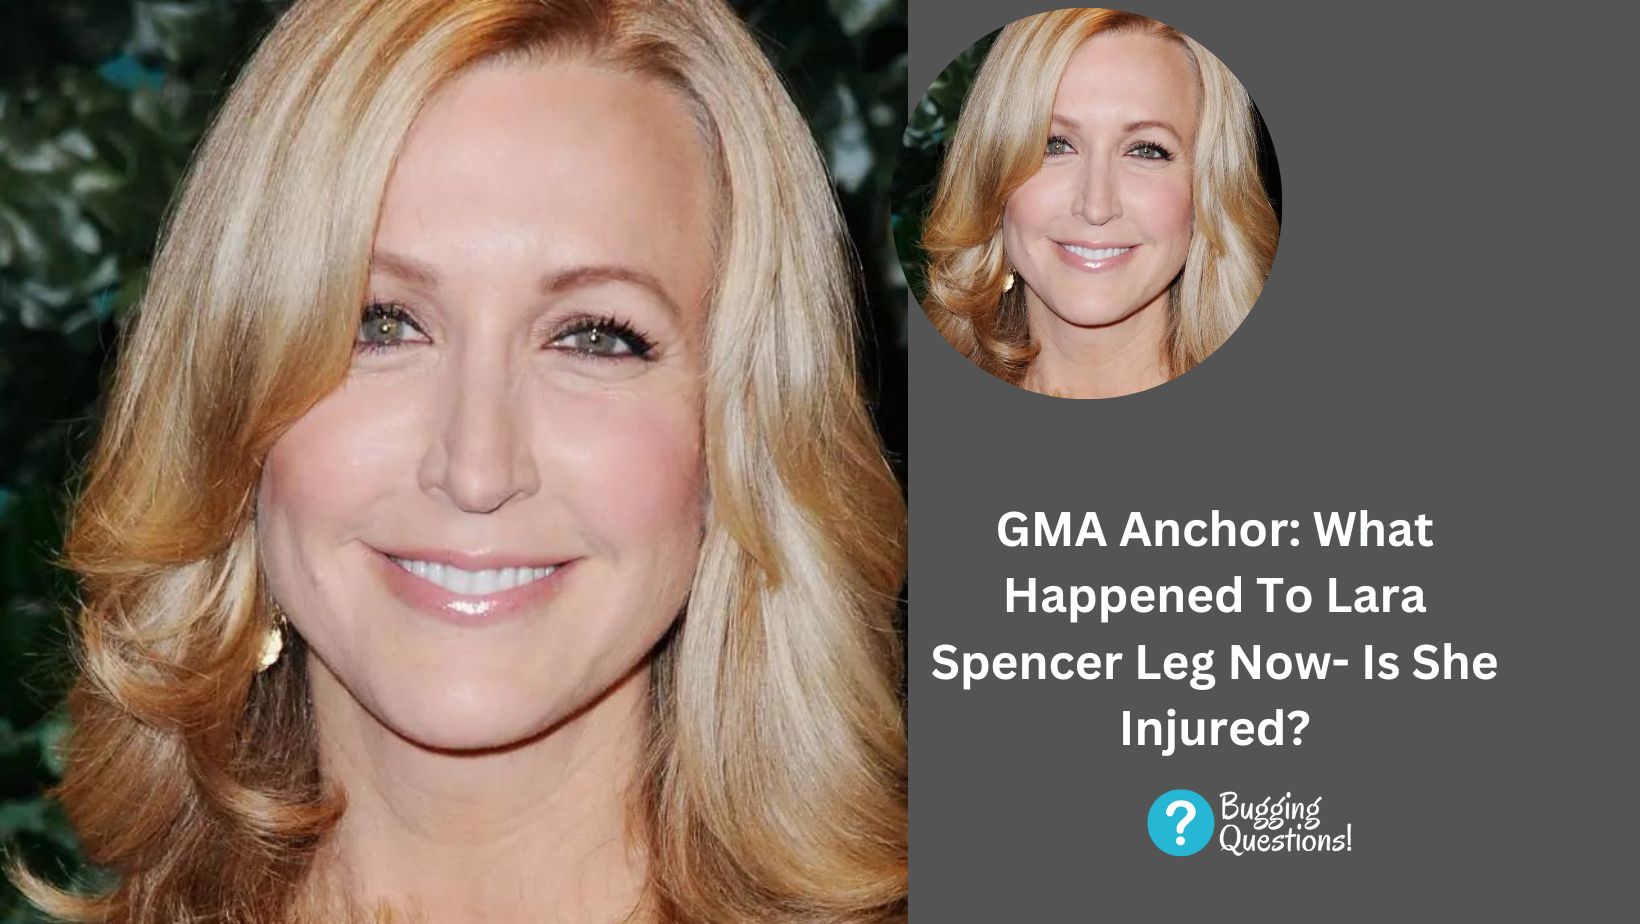 GMA Anchor: What Happened To Lara Spencer Leg Now- Is She Injured?